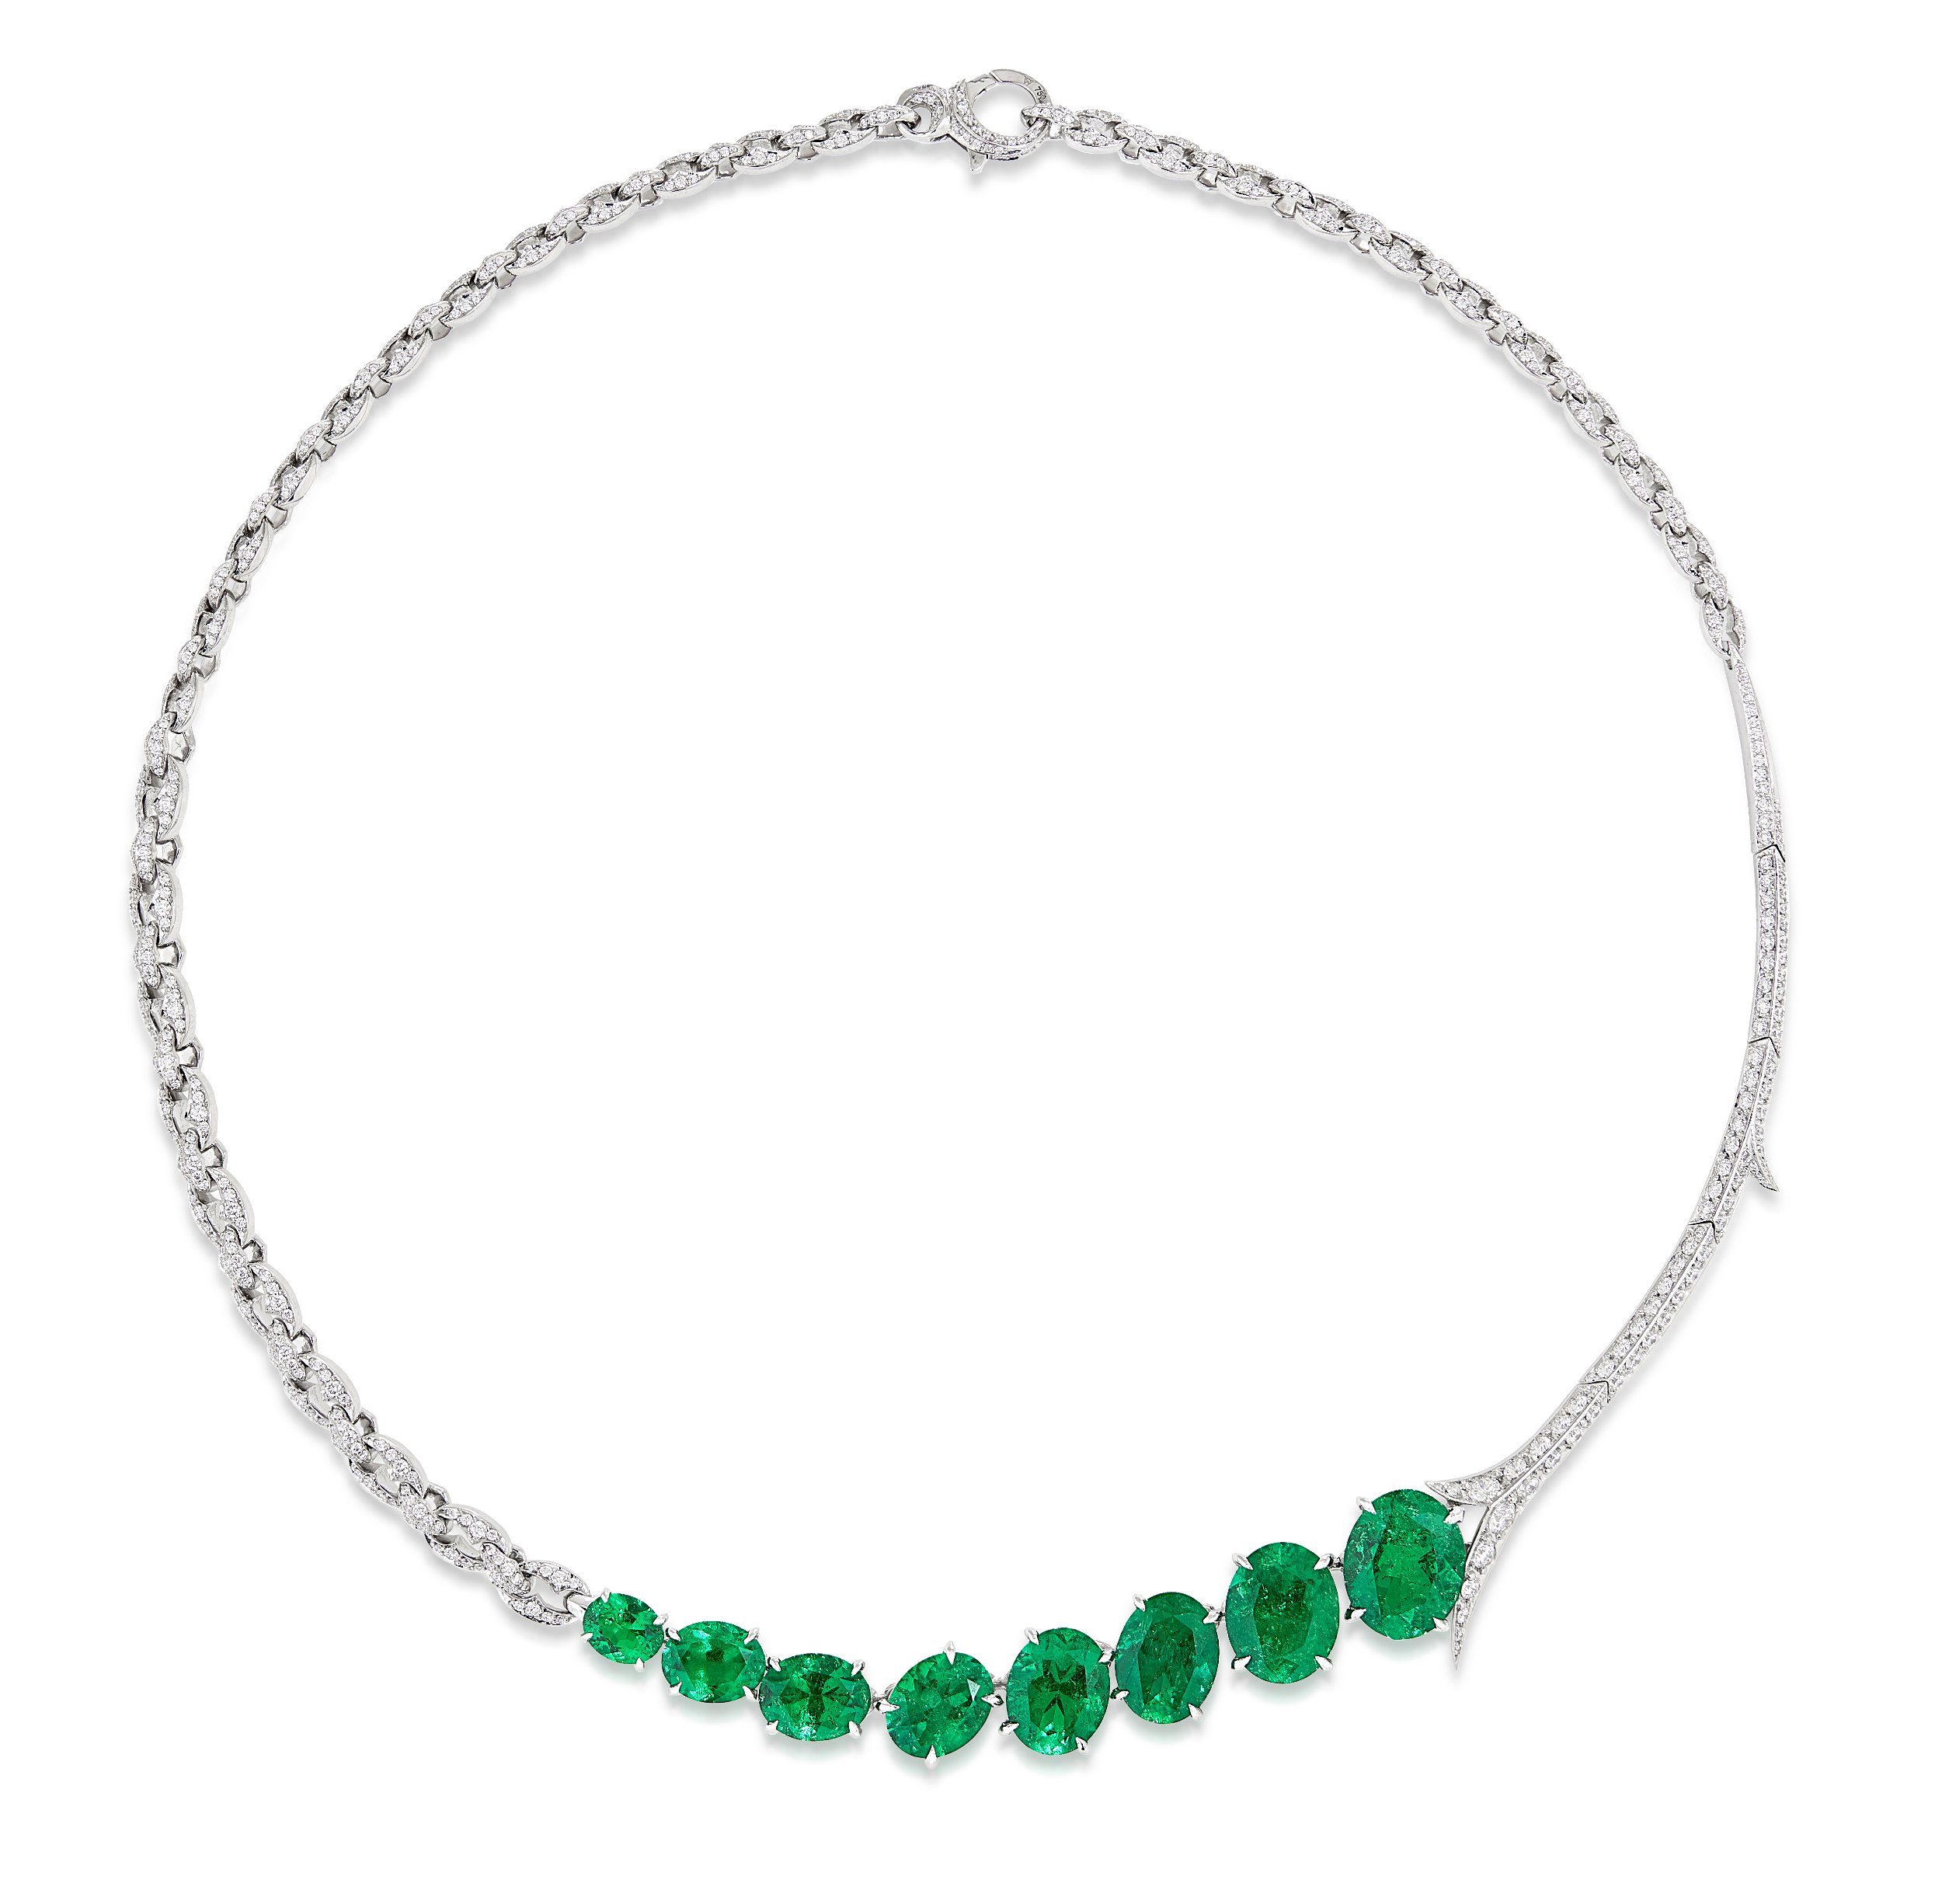 Thorn Embrace Forbidden Fruit Collar Necklace with Muzo Emeralds and White Diamonds in 18kt White Gold